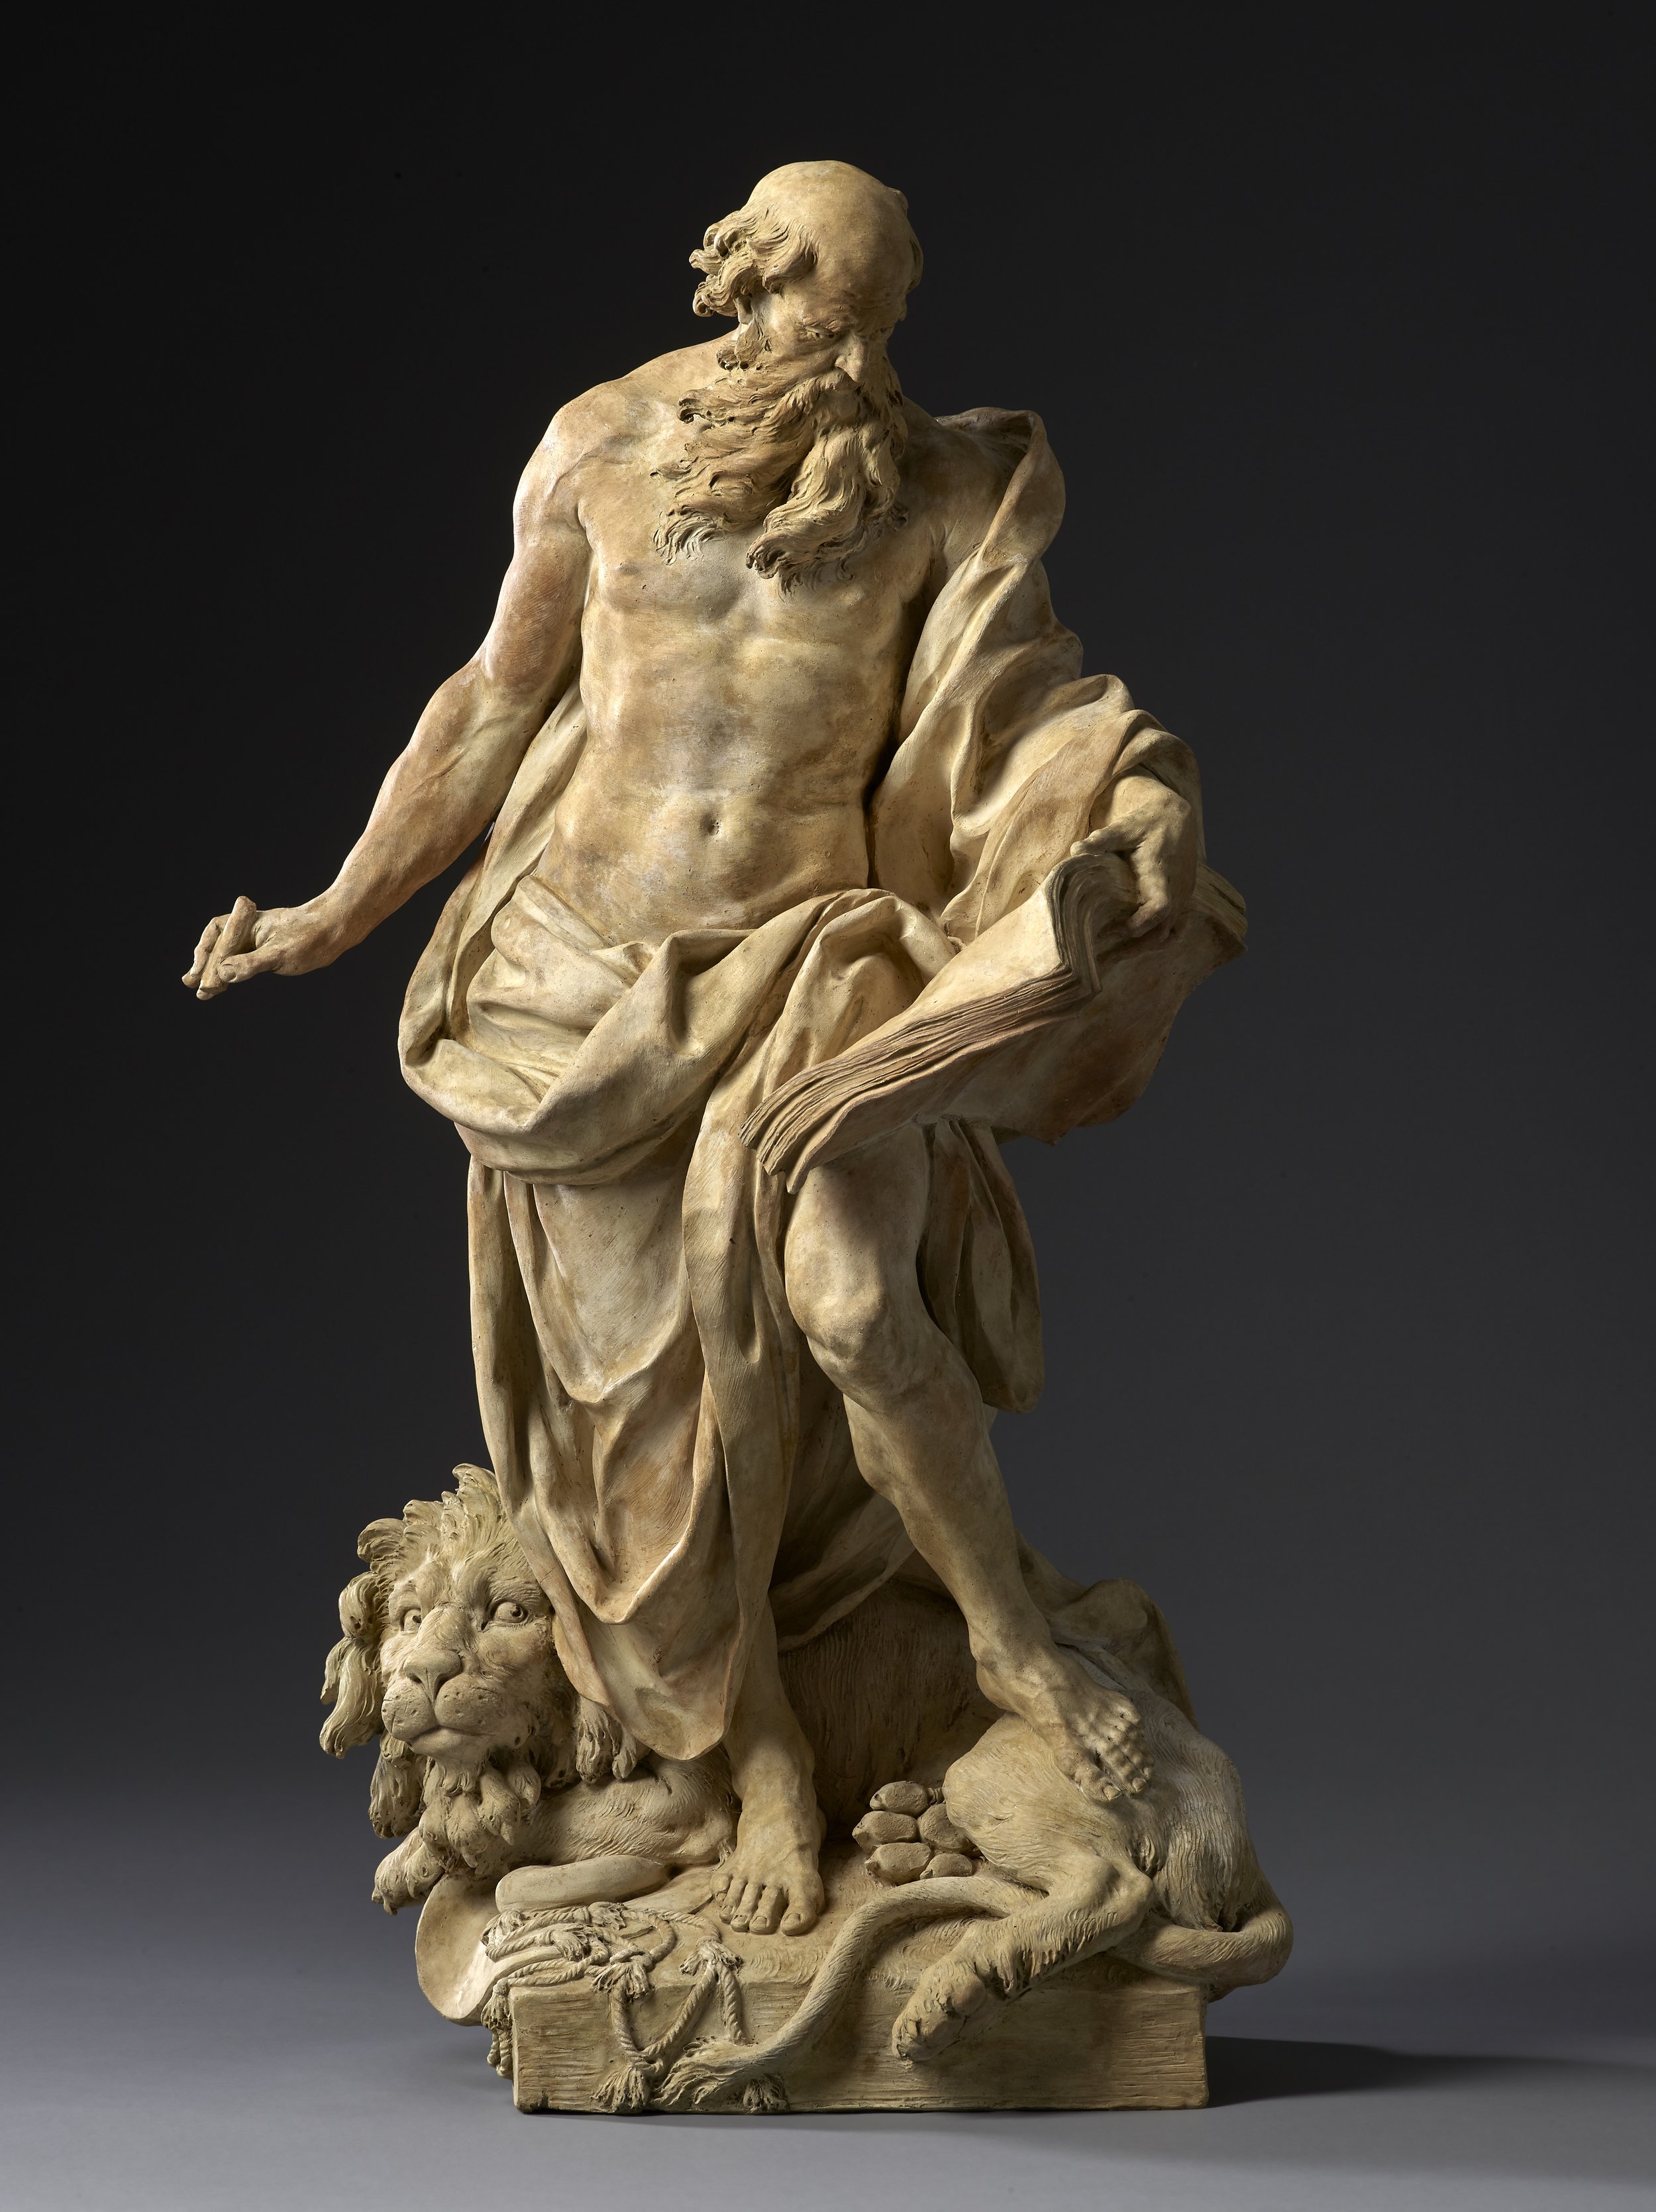  AGOSTINO CORSINI  Bologna, 1688 – Naples, 1772      Saint Jerome   1734     Terracotta,   64.5 cm high     Provenance:   The terracotta presentation model submitted by the artist to the director of San Giovanni in Laterano building works, Alessandro